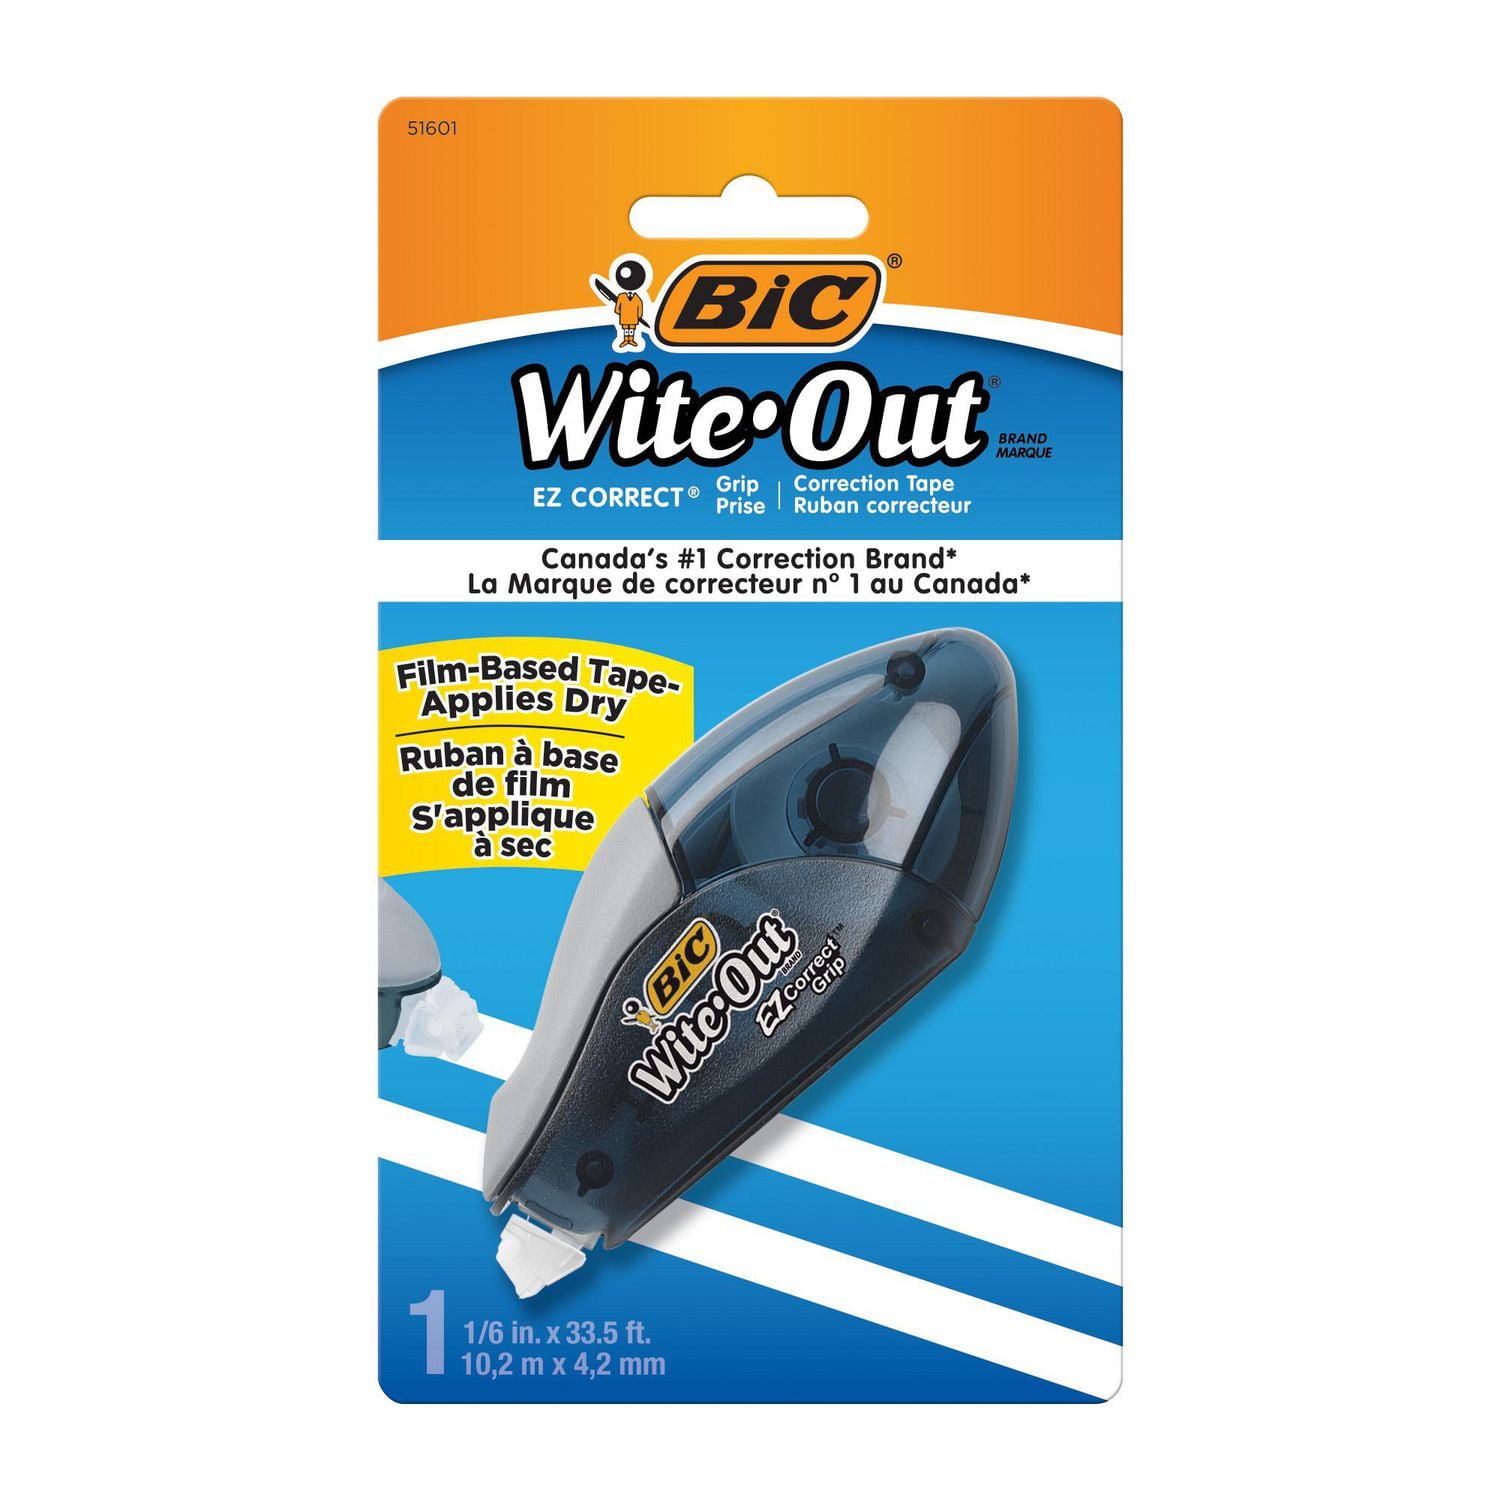 BIC Wite-Out Brand EZ Correct Correction Tape, White, Fast, Clean & Easy To  Use, Tear-Resistant Tape, 1-Count, Pack of 1